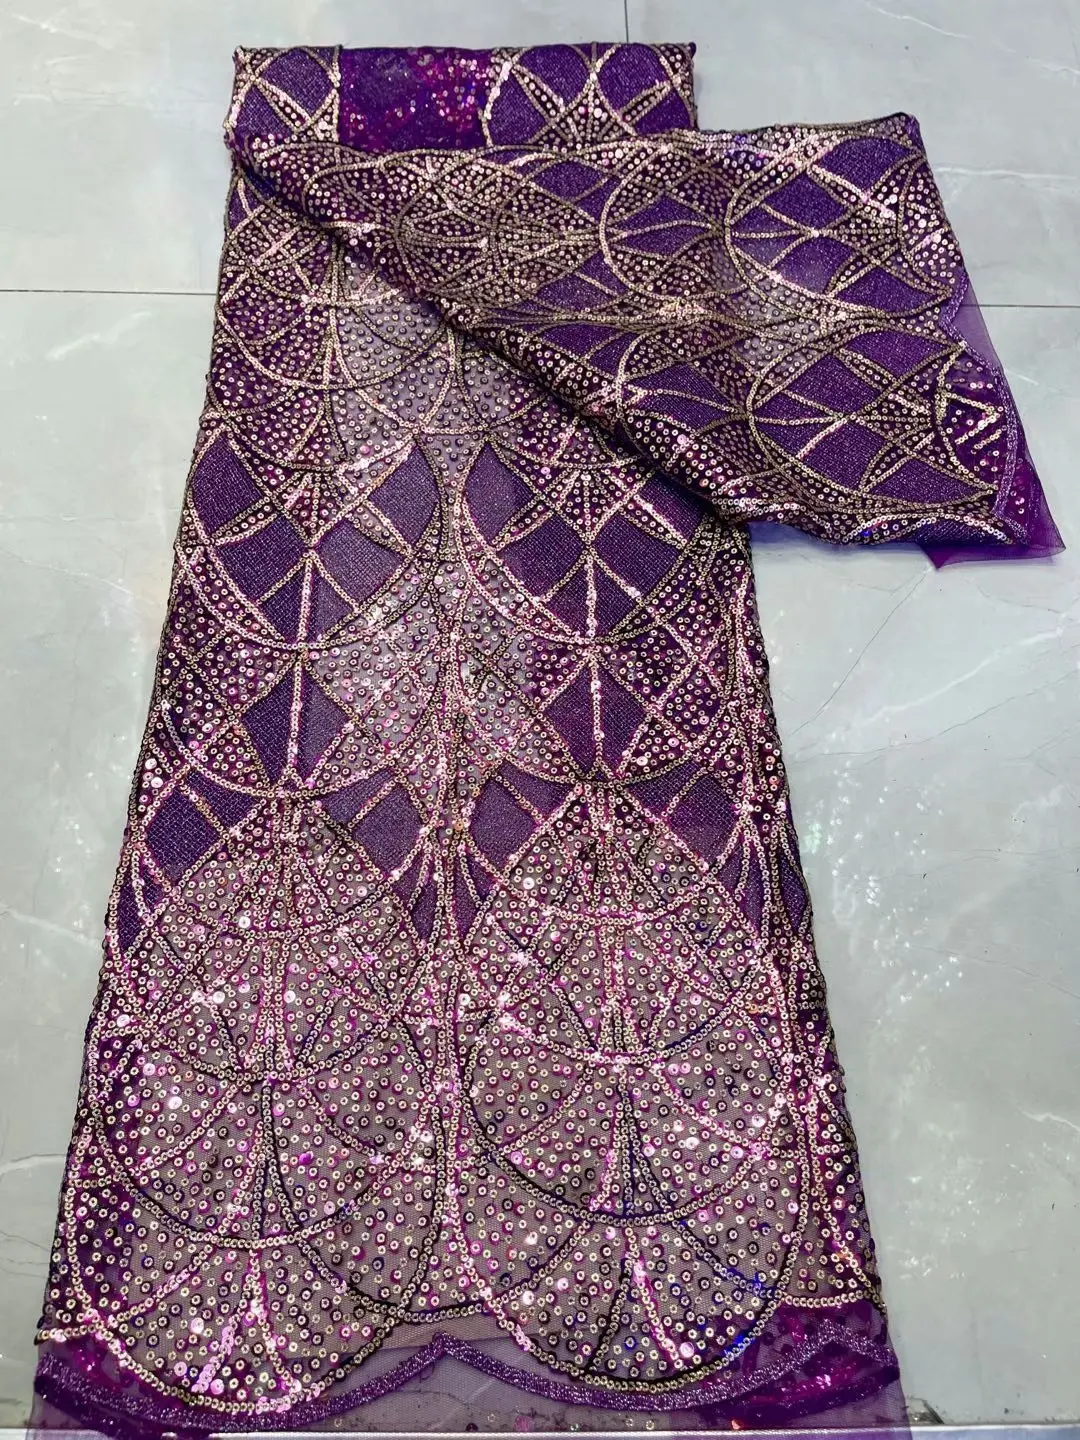 

Elegant Newest Fashion Nigeria Aso Ebi Party Lady Dress Material in Purple with Many Sequins Tulle Net Lace Fabric 2021 T164